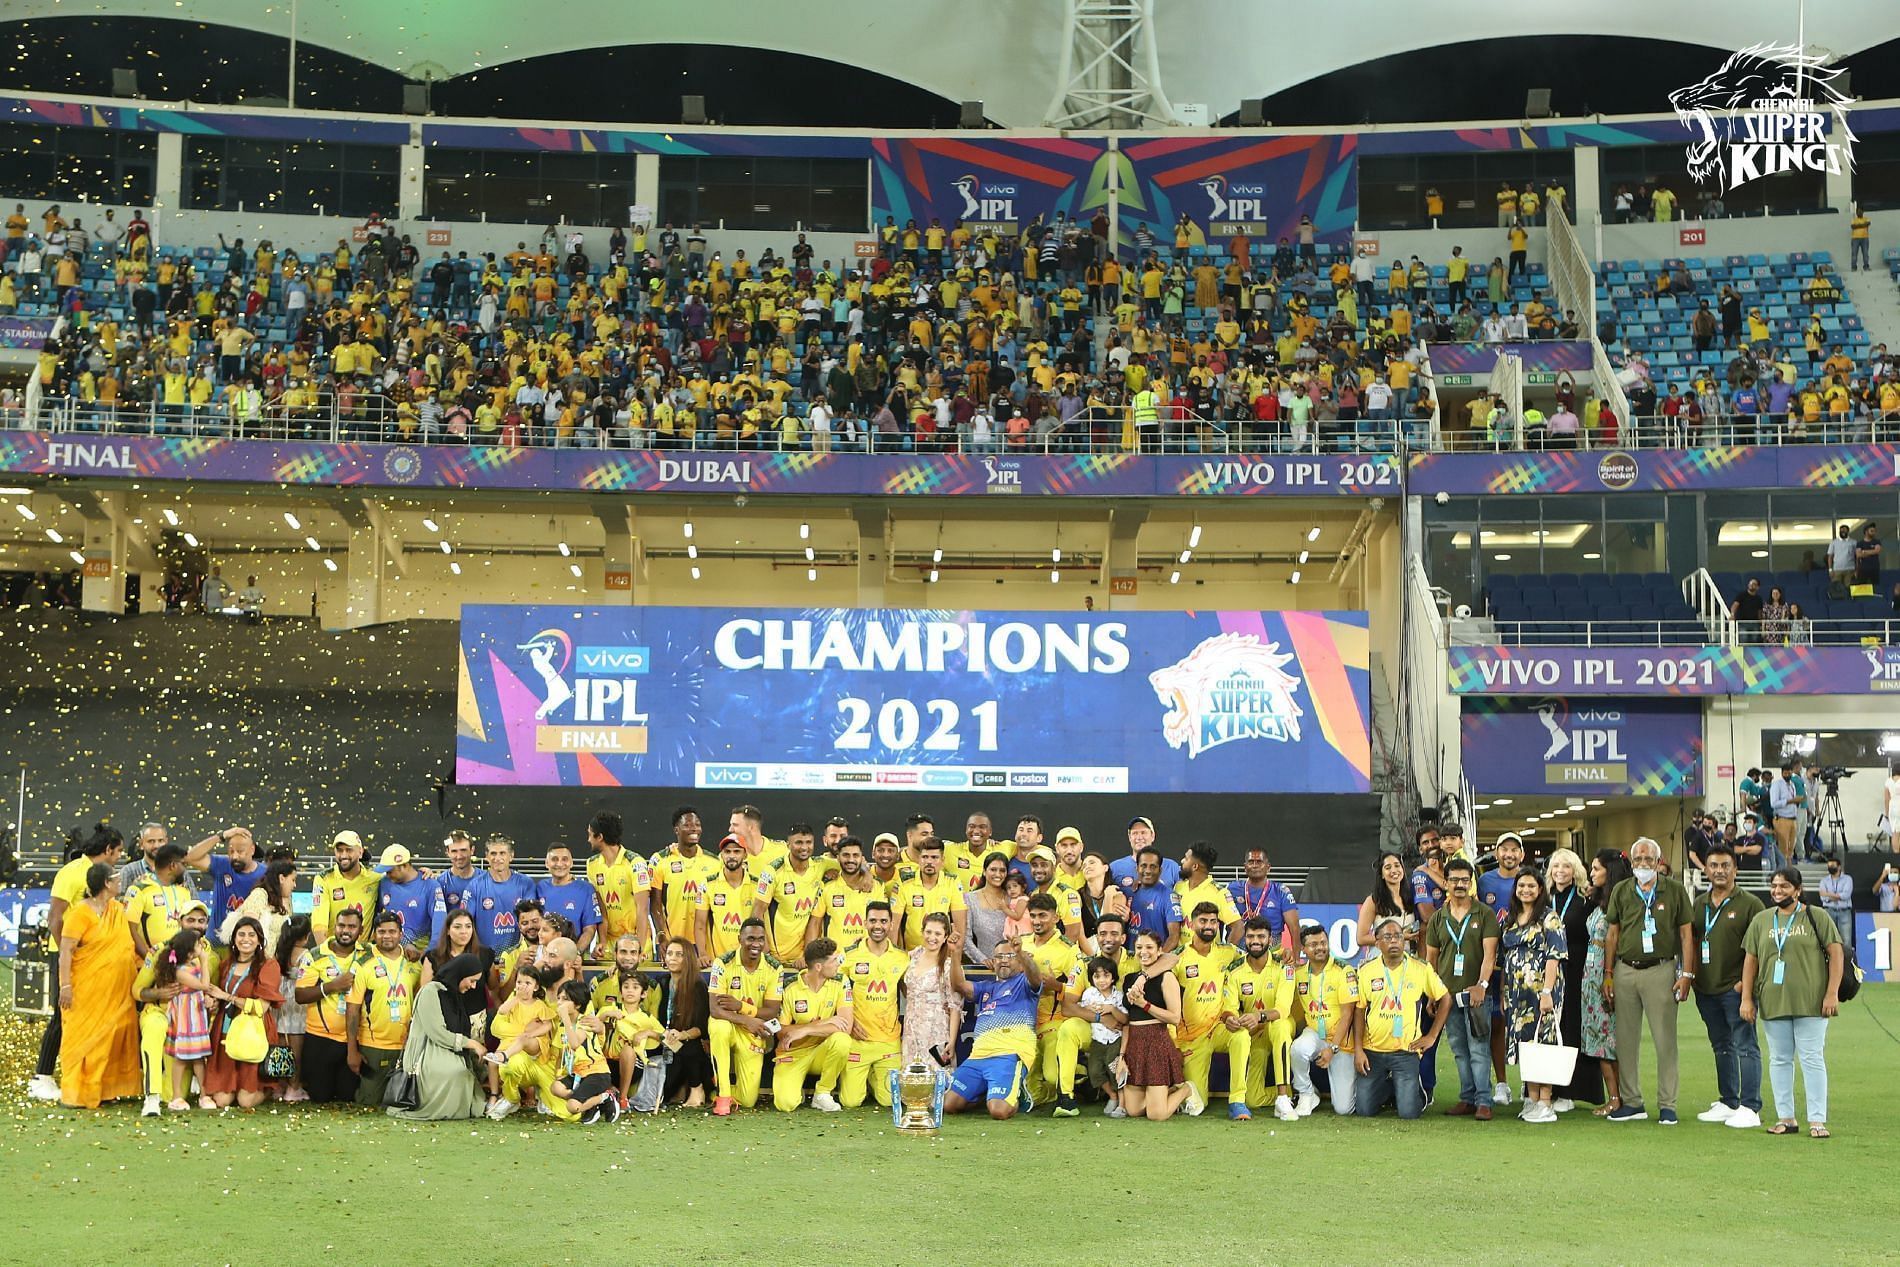 Chennai Super Kings (CSK) pose with IPL 2021 trophy. Pic: CSK/ Twitter